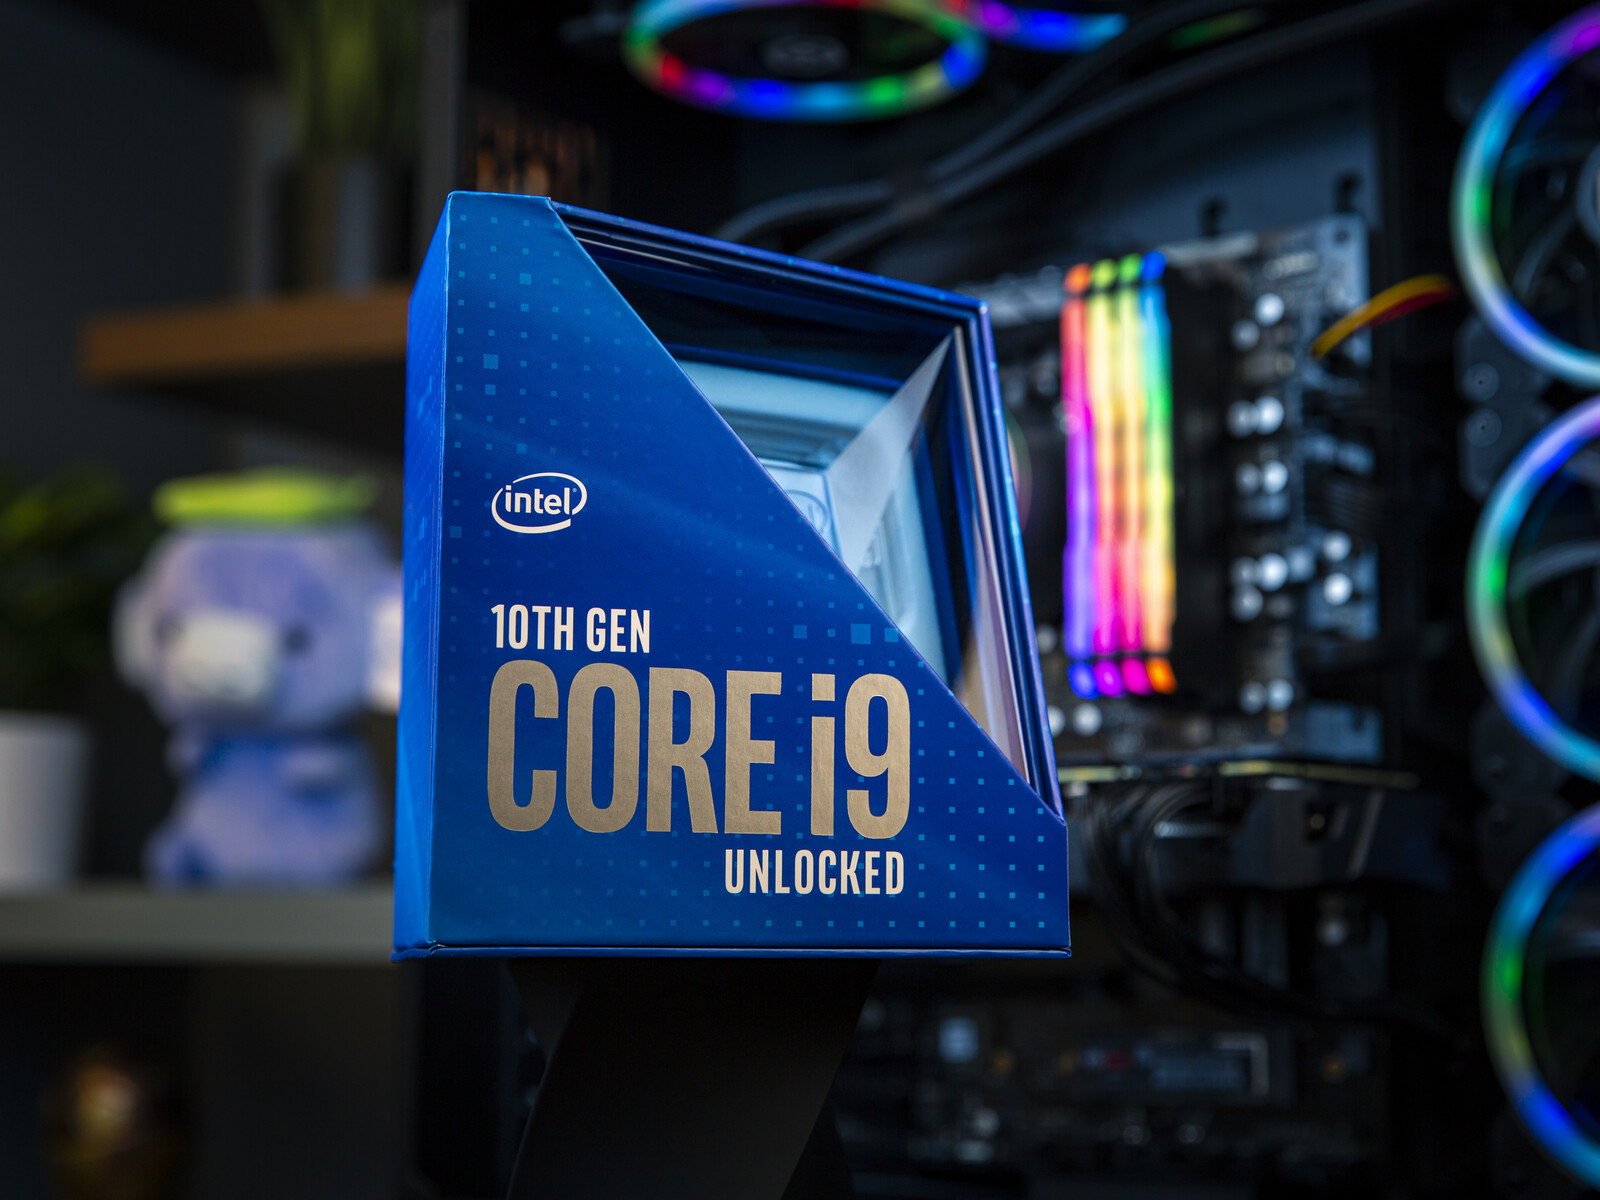 Intel Rocket Lake S SKUs And Specifications Leak: Core I9 11900K To Offer 8C 16T, 5.3 GHz Single Core And 4.8 GHz All Core Boosts With 16 MB L3 Cache.net News